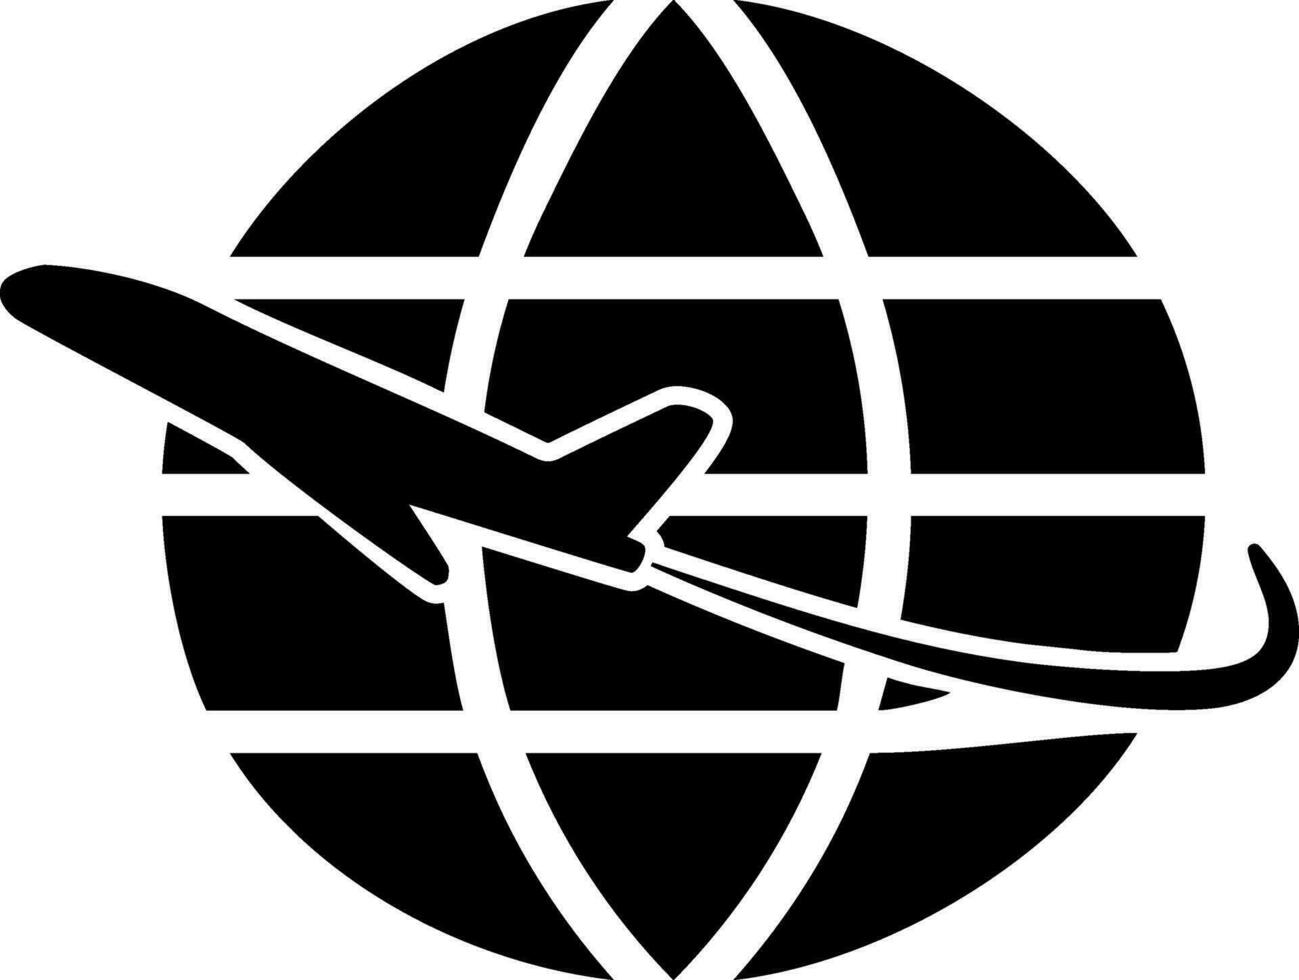 Travel icon with globe and flying plane. vector